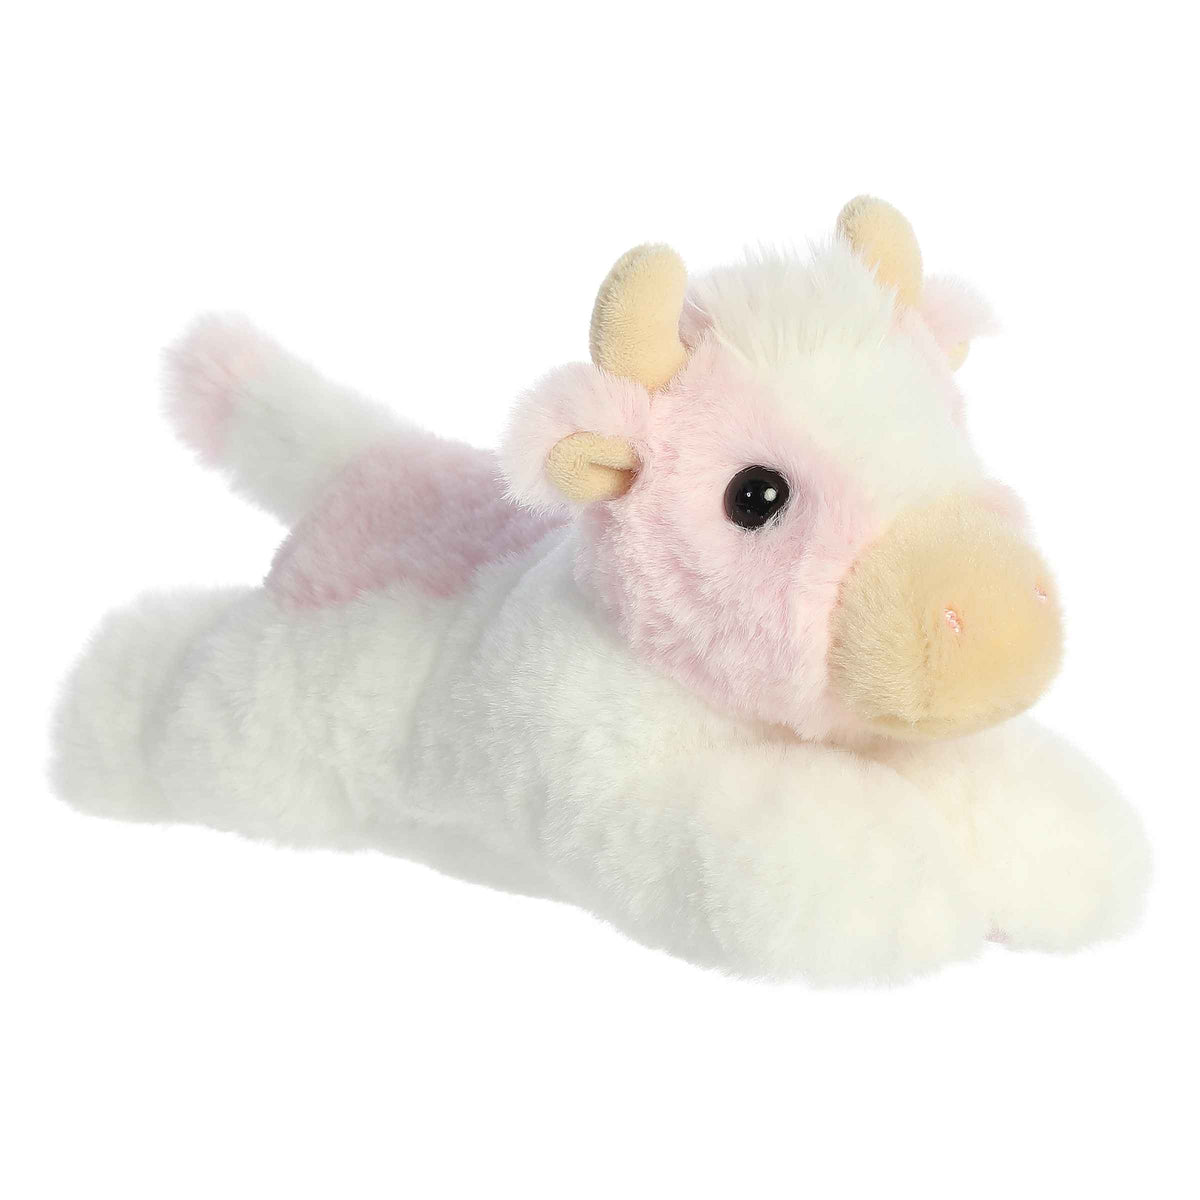 Sadie Strawberry Cow plush by Aurora stuffed animals, pink spots, soft and durable, farm-themed, cuddly